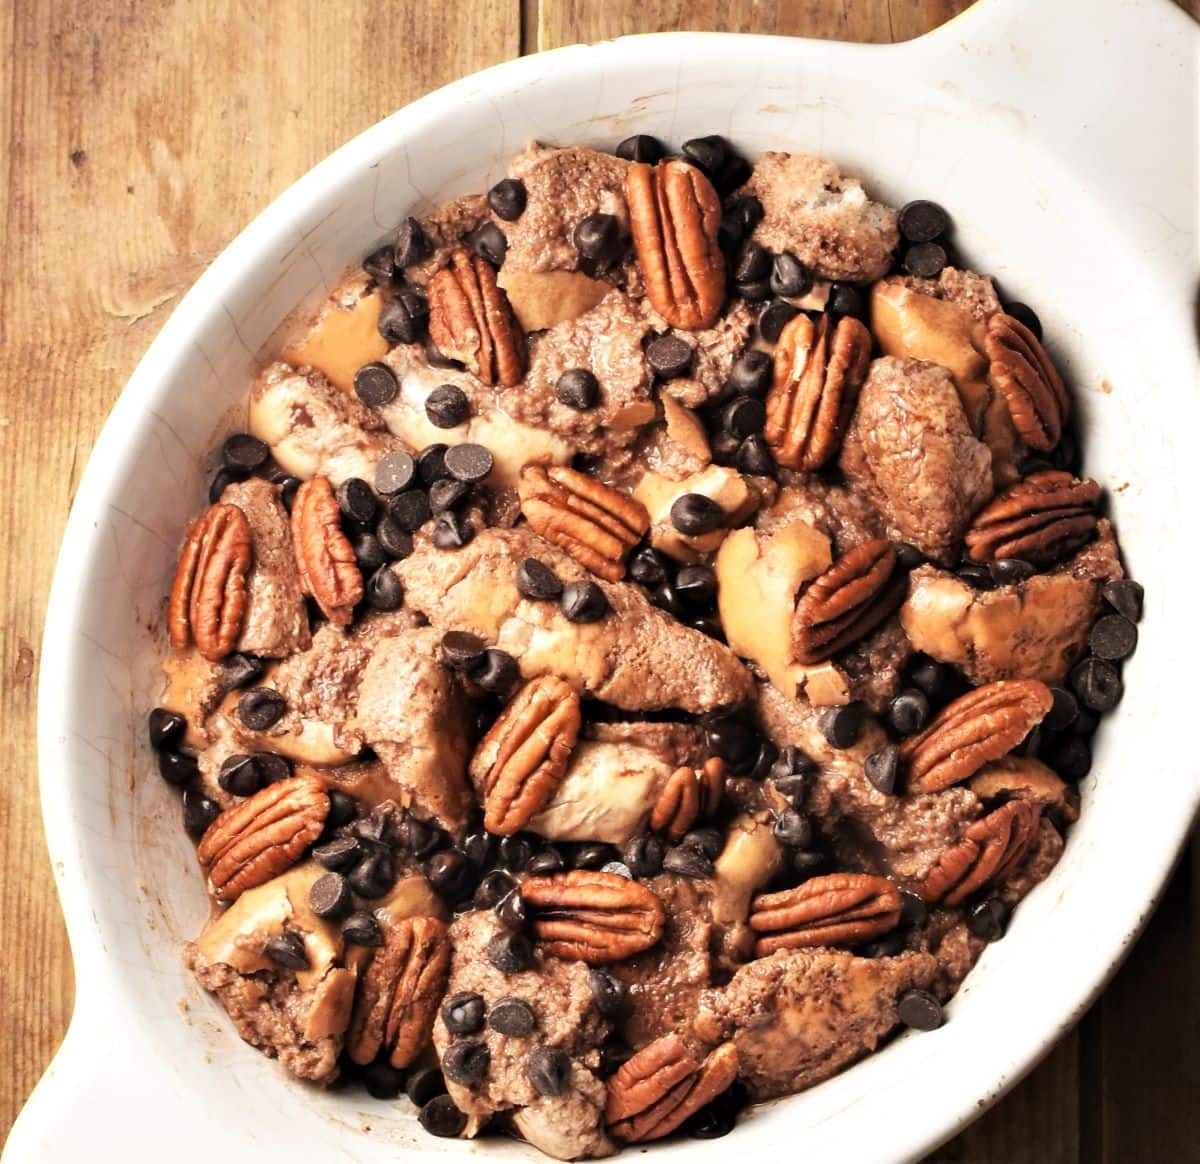 French toast casserole with chocolate chips and pecans in oval dish.